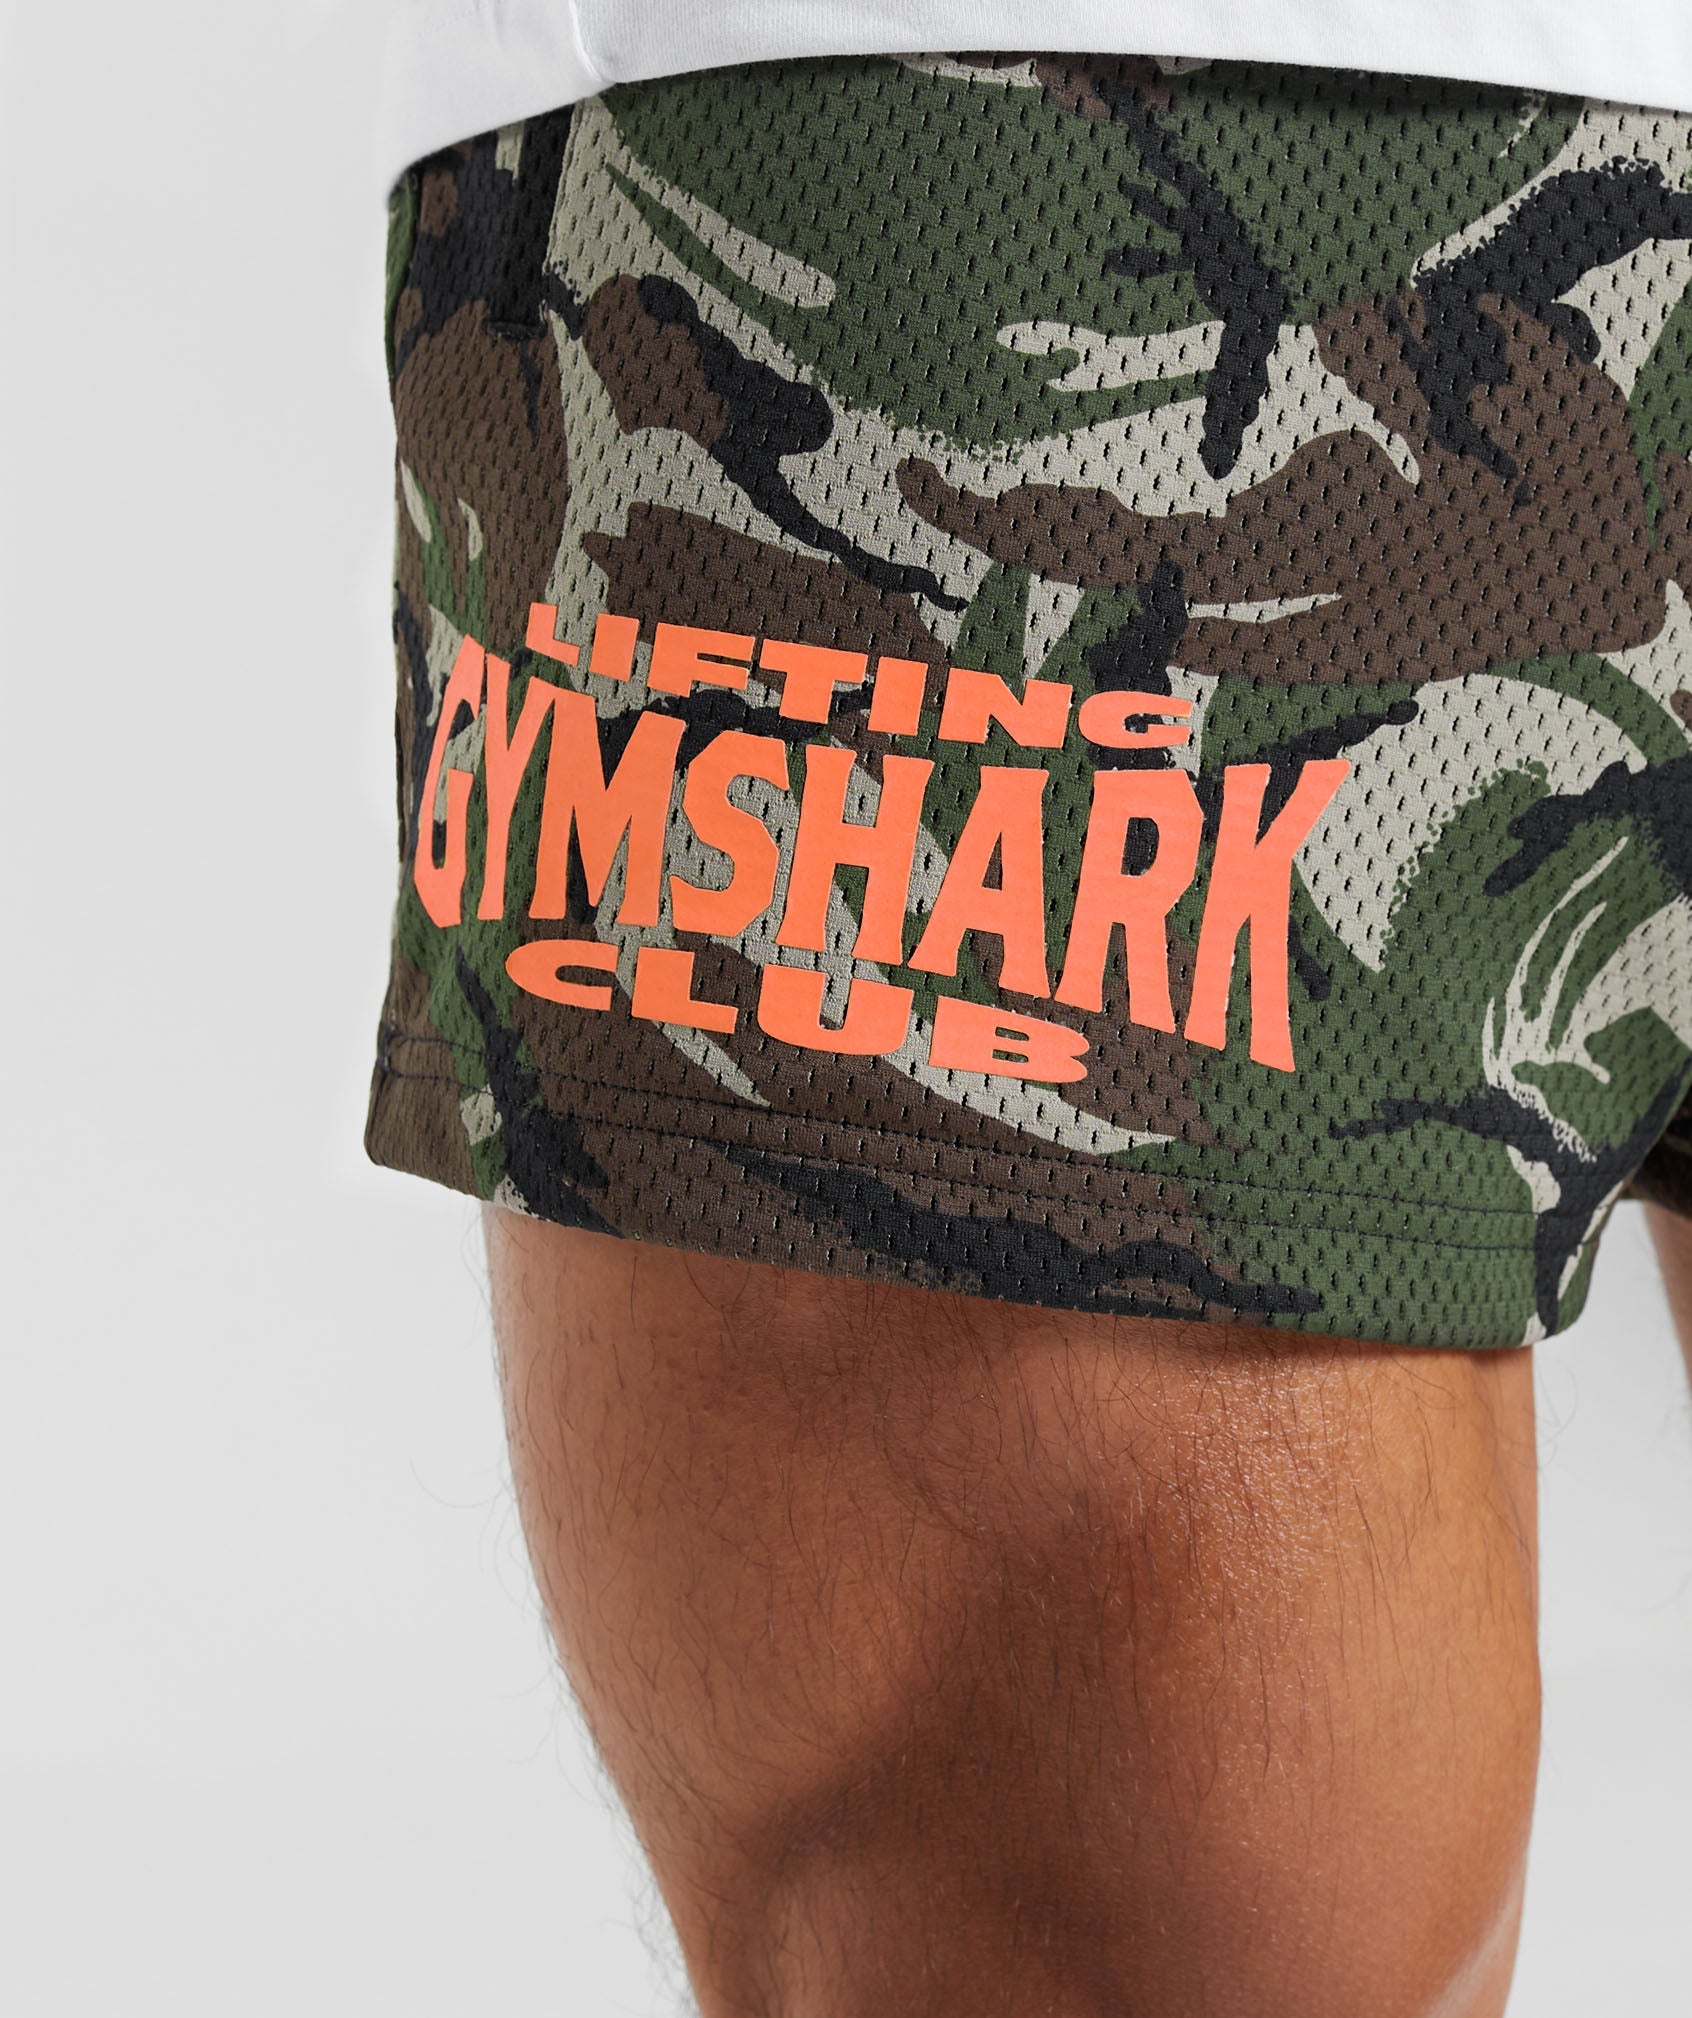 Lifting Club Printed Mesh 5" Shorts in Winter Olive - view 6